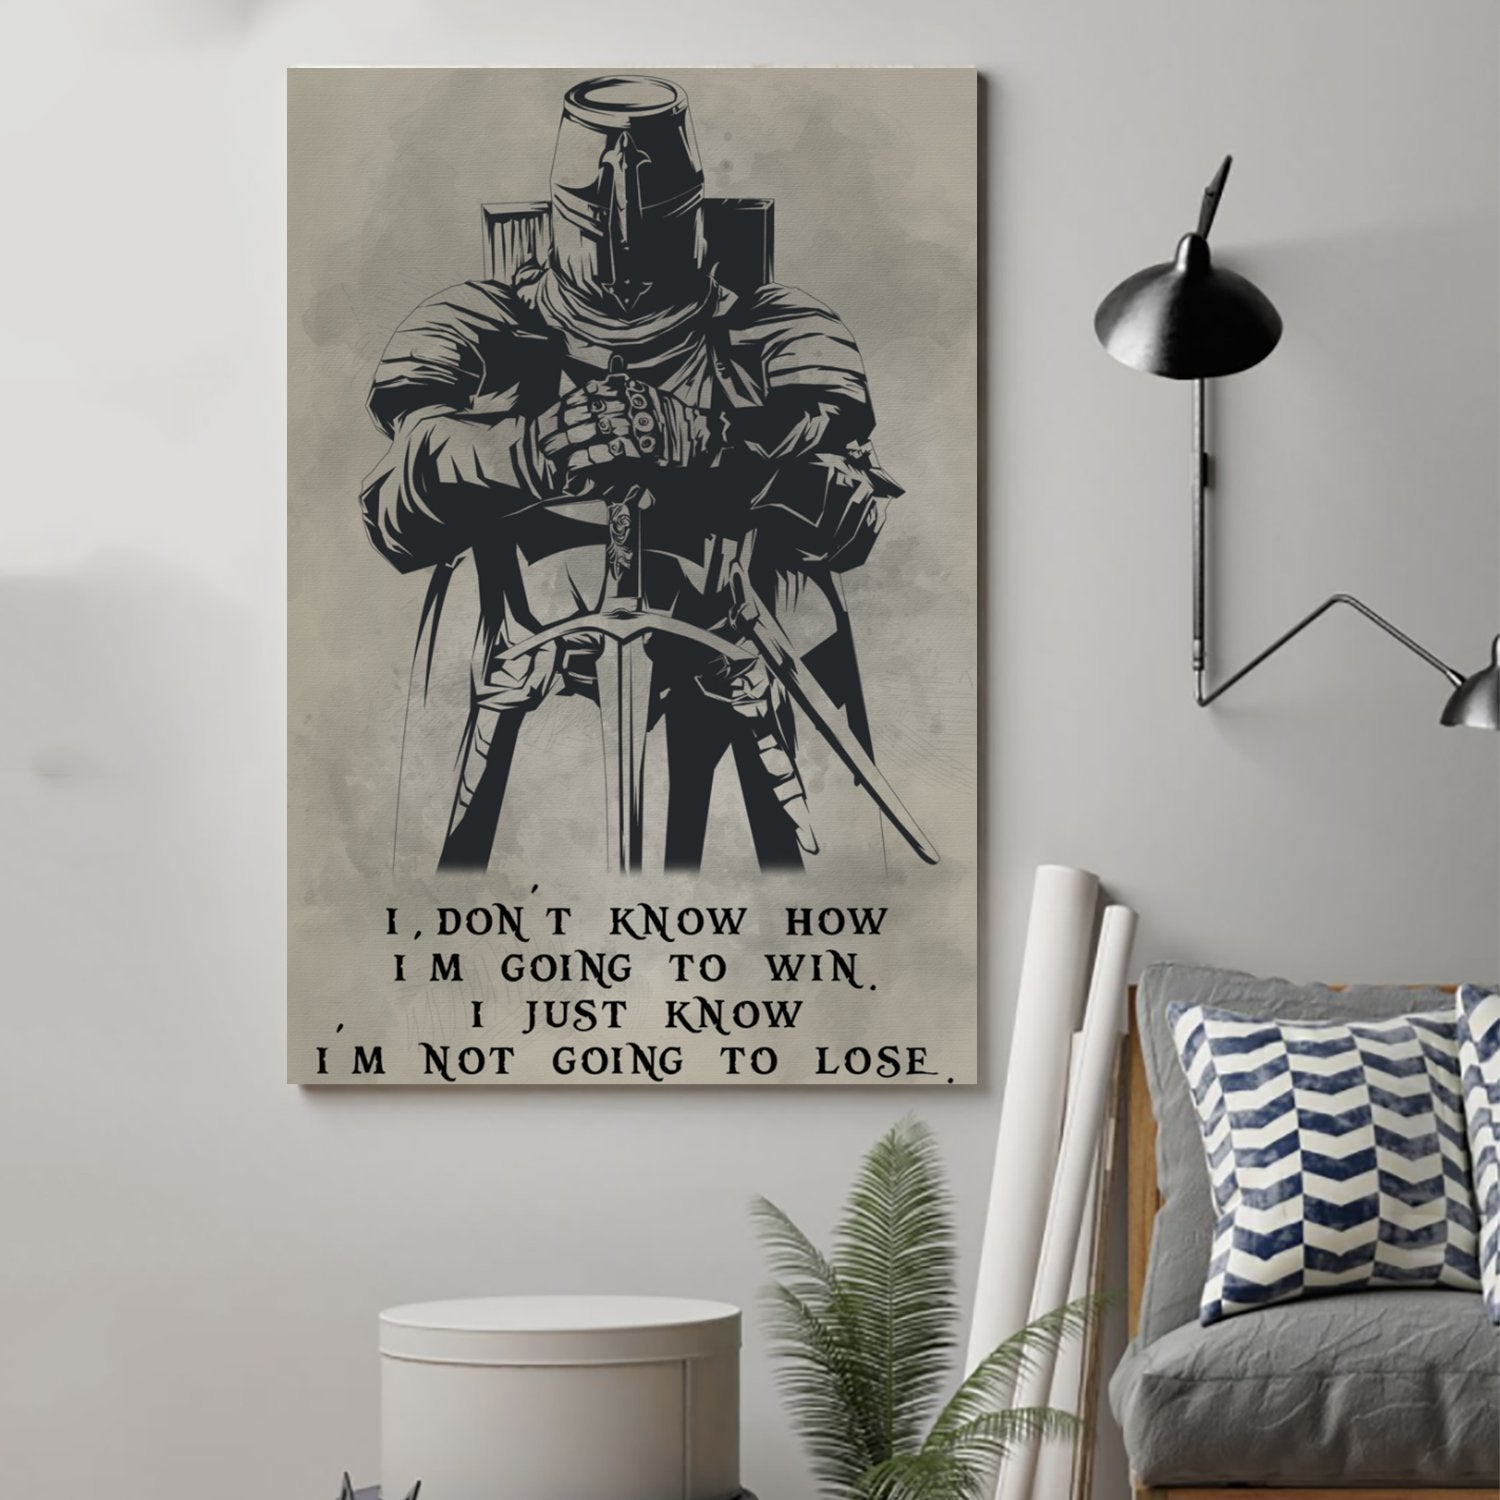 knight templar Canvas and Poster Im going to win wall decor visual art 1598332343443.jpg